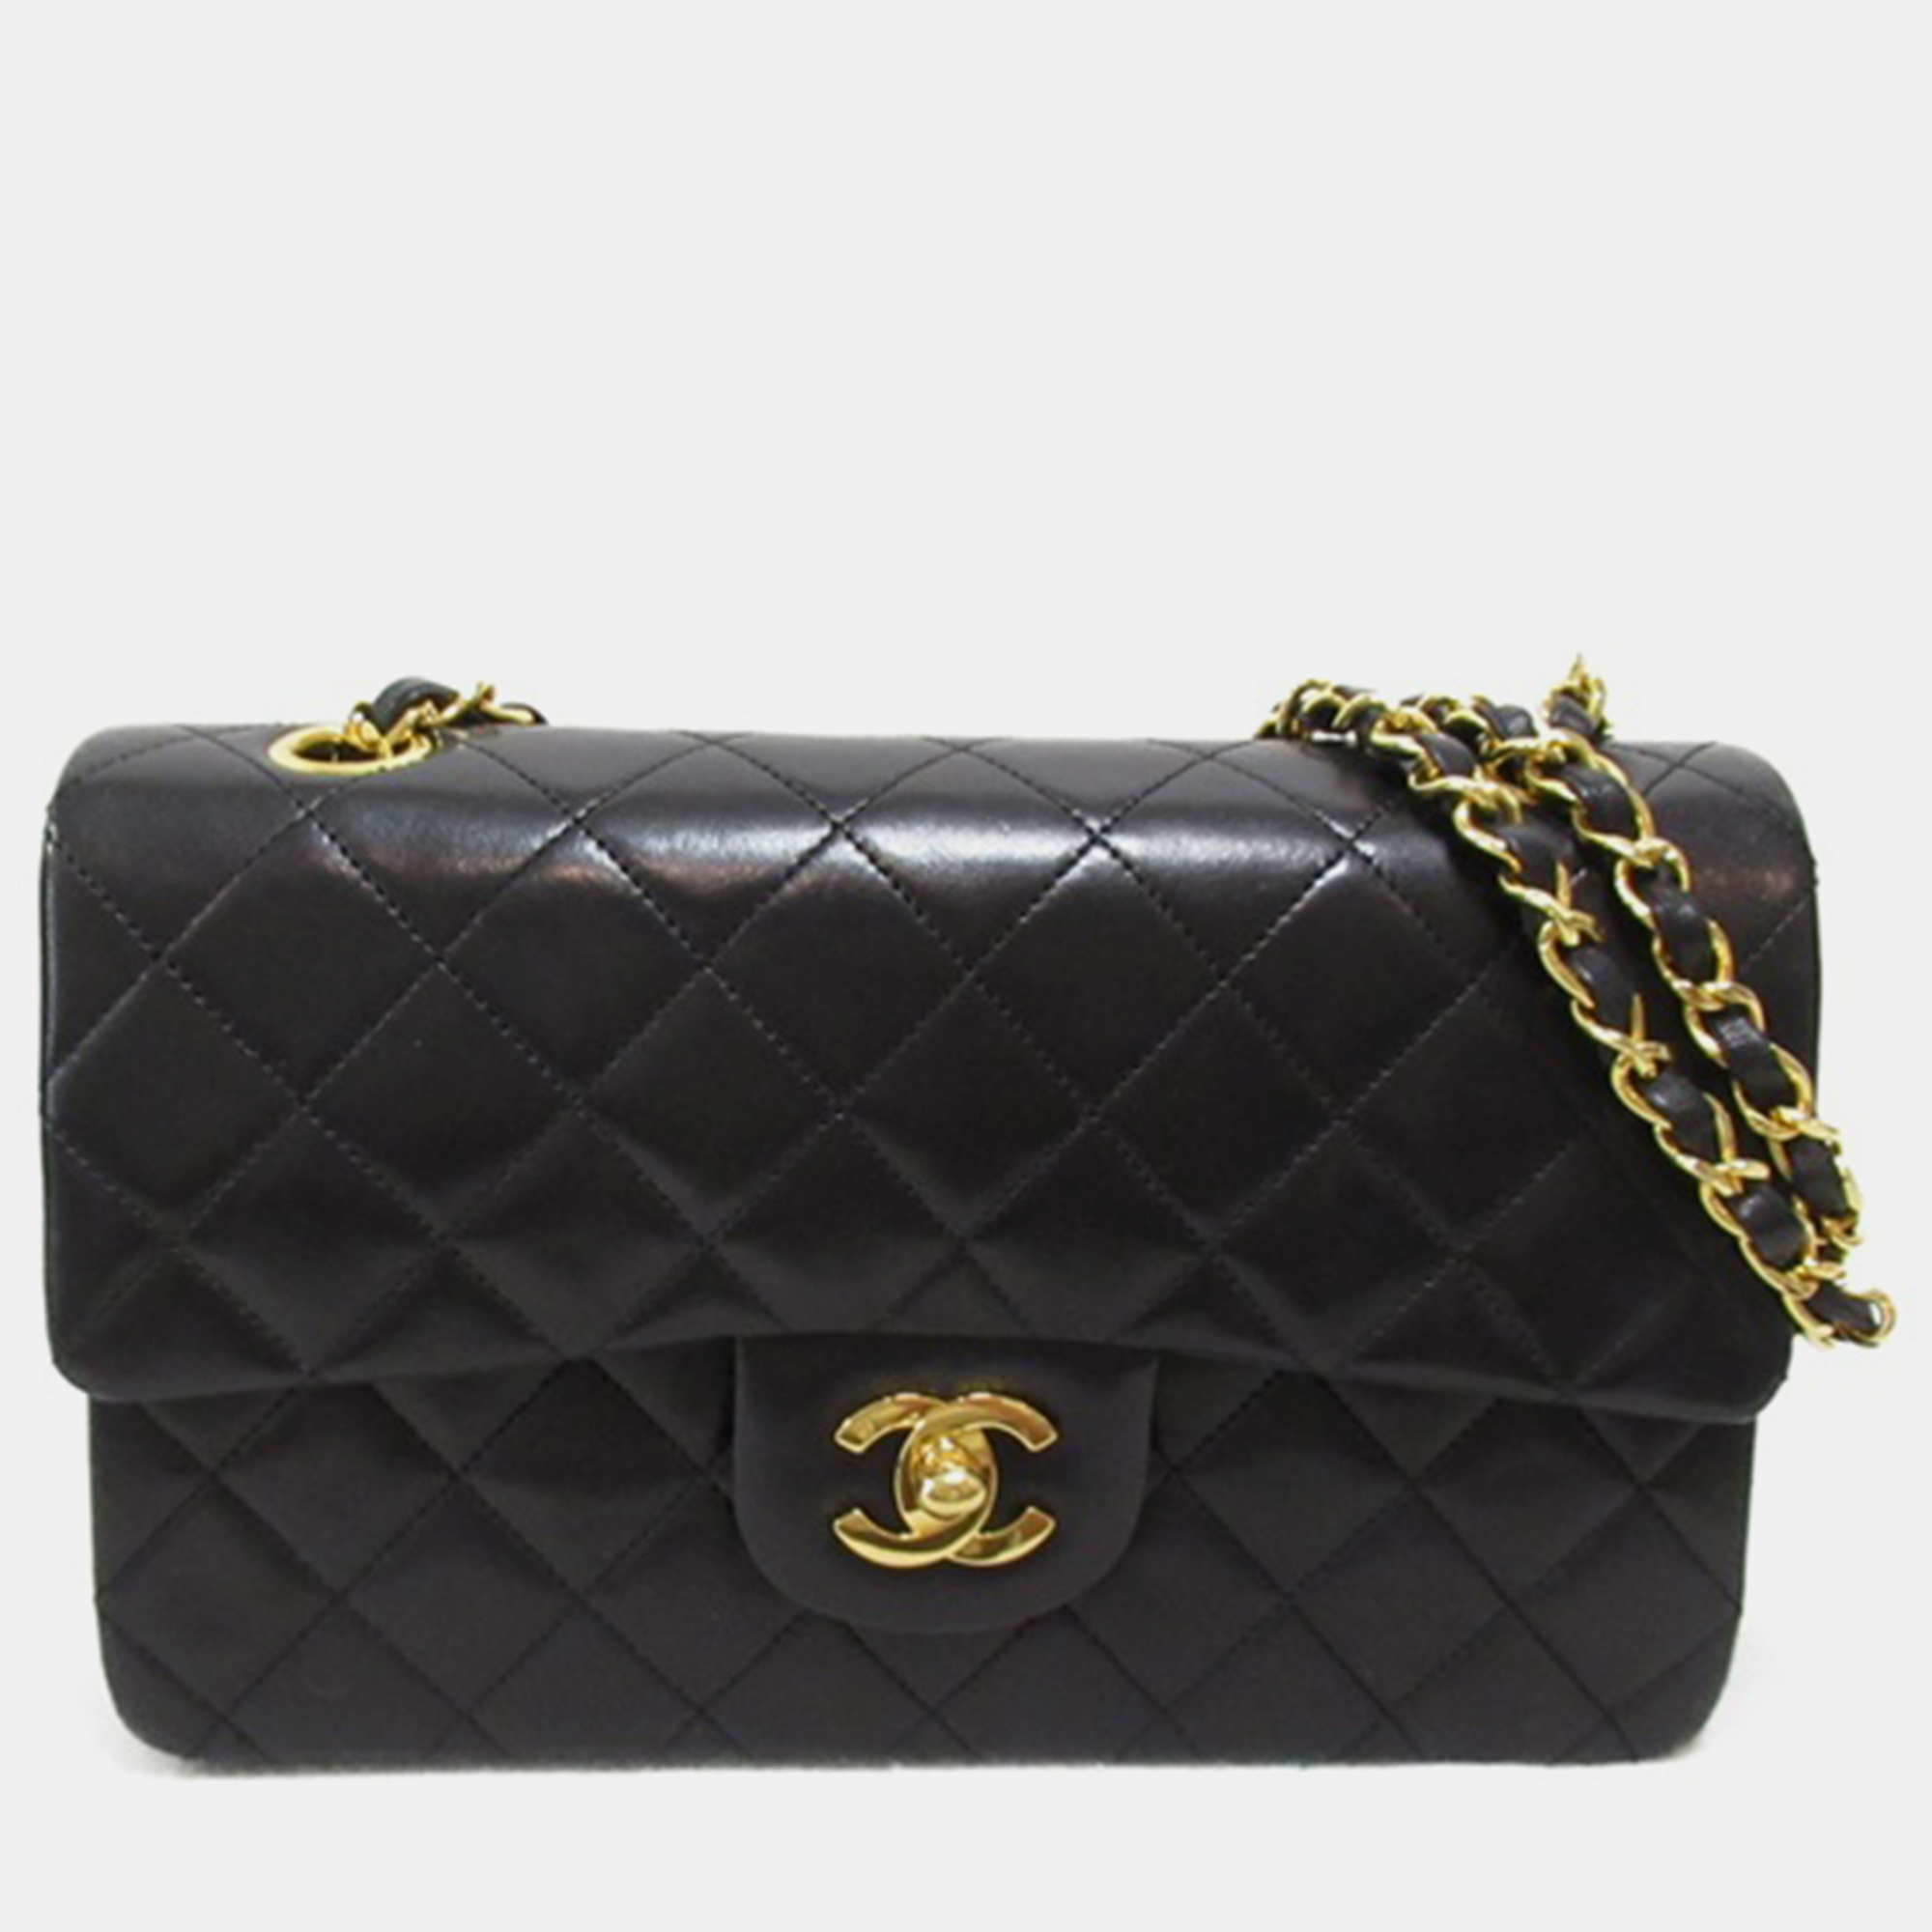 Chanel black leather small classic double flap shoulder bag